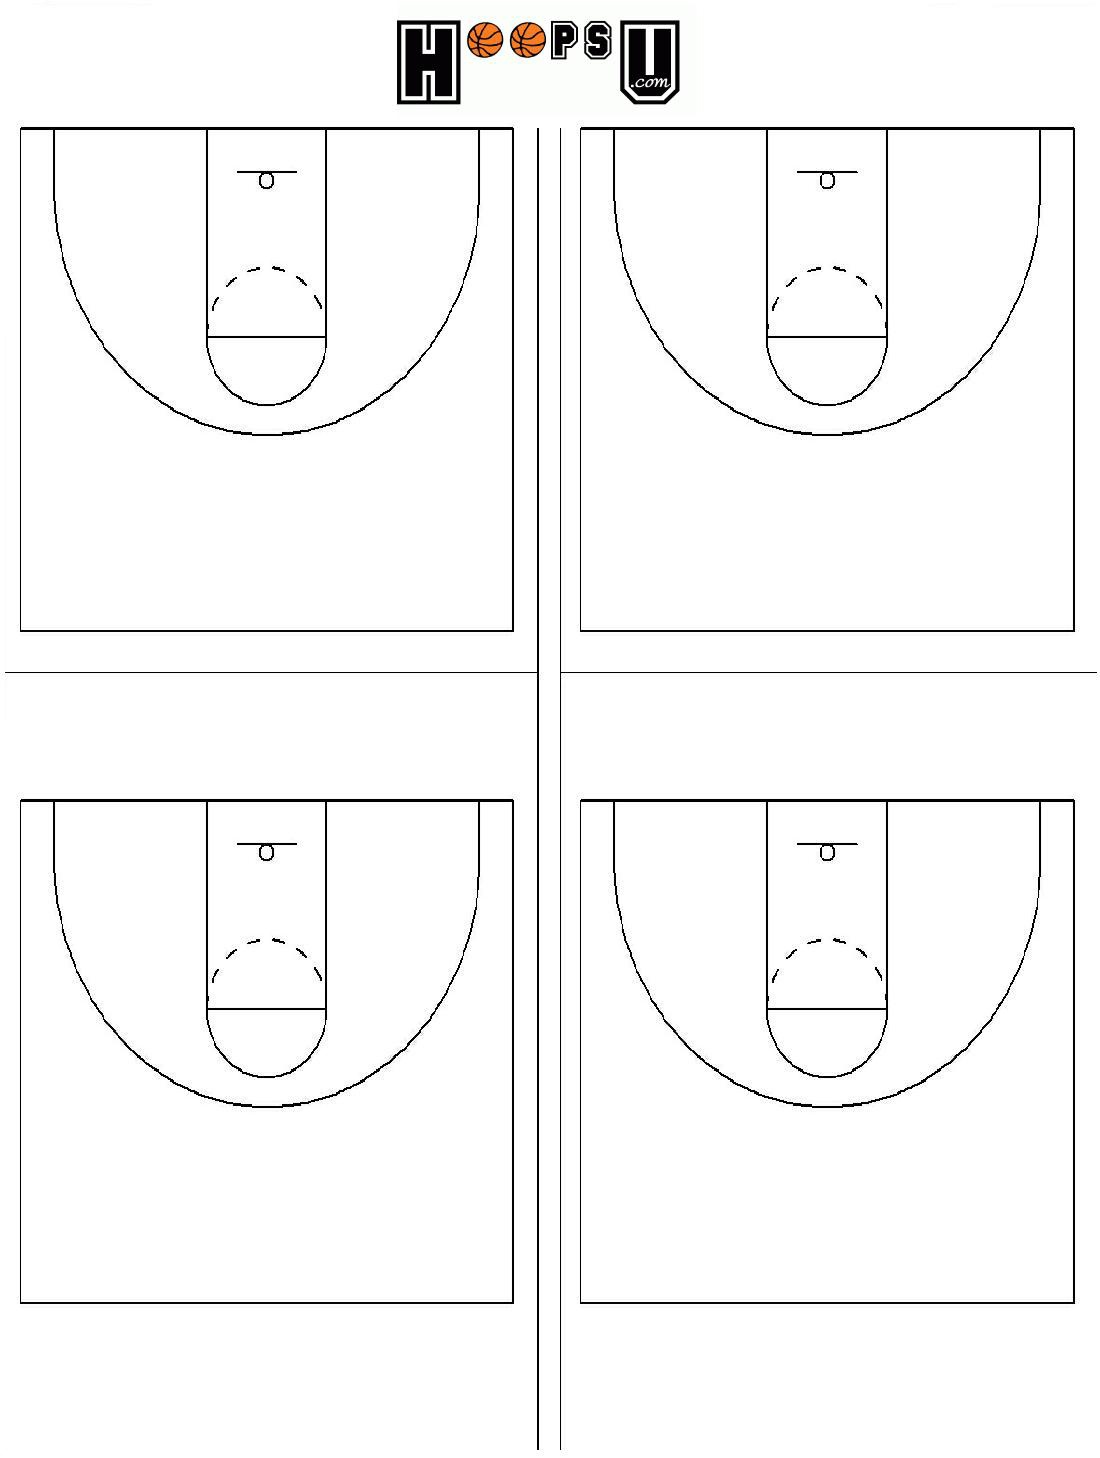 What Are The Basketball Court Dimensions - Diagrams For Court Striping - Free Printable Basketball Court